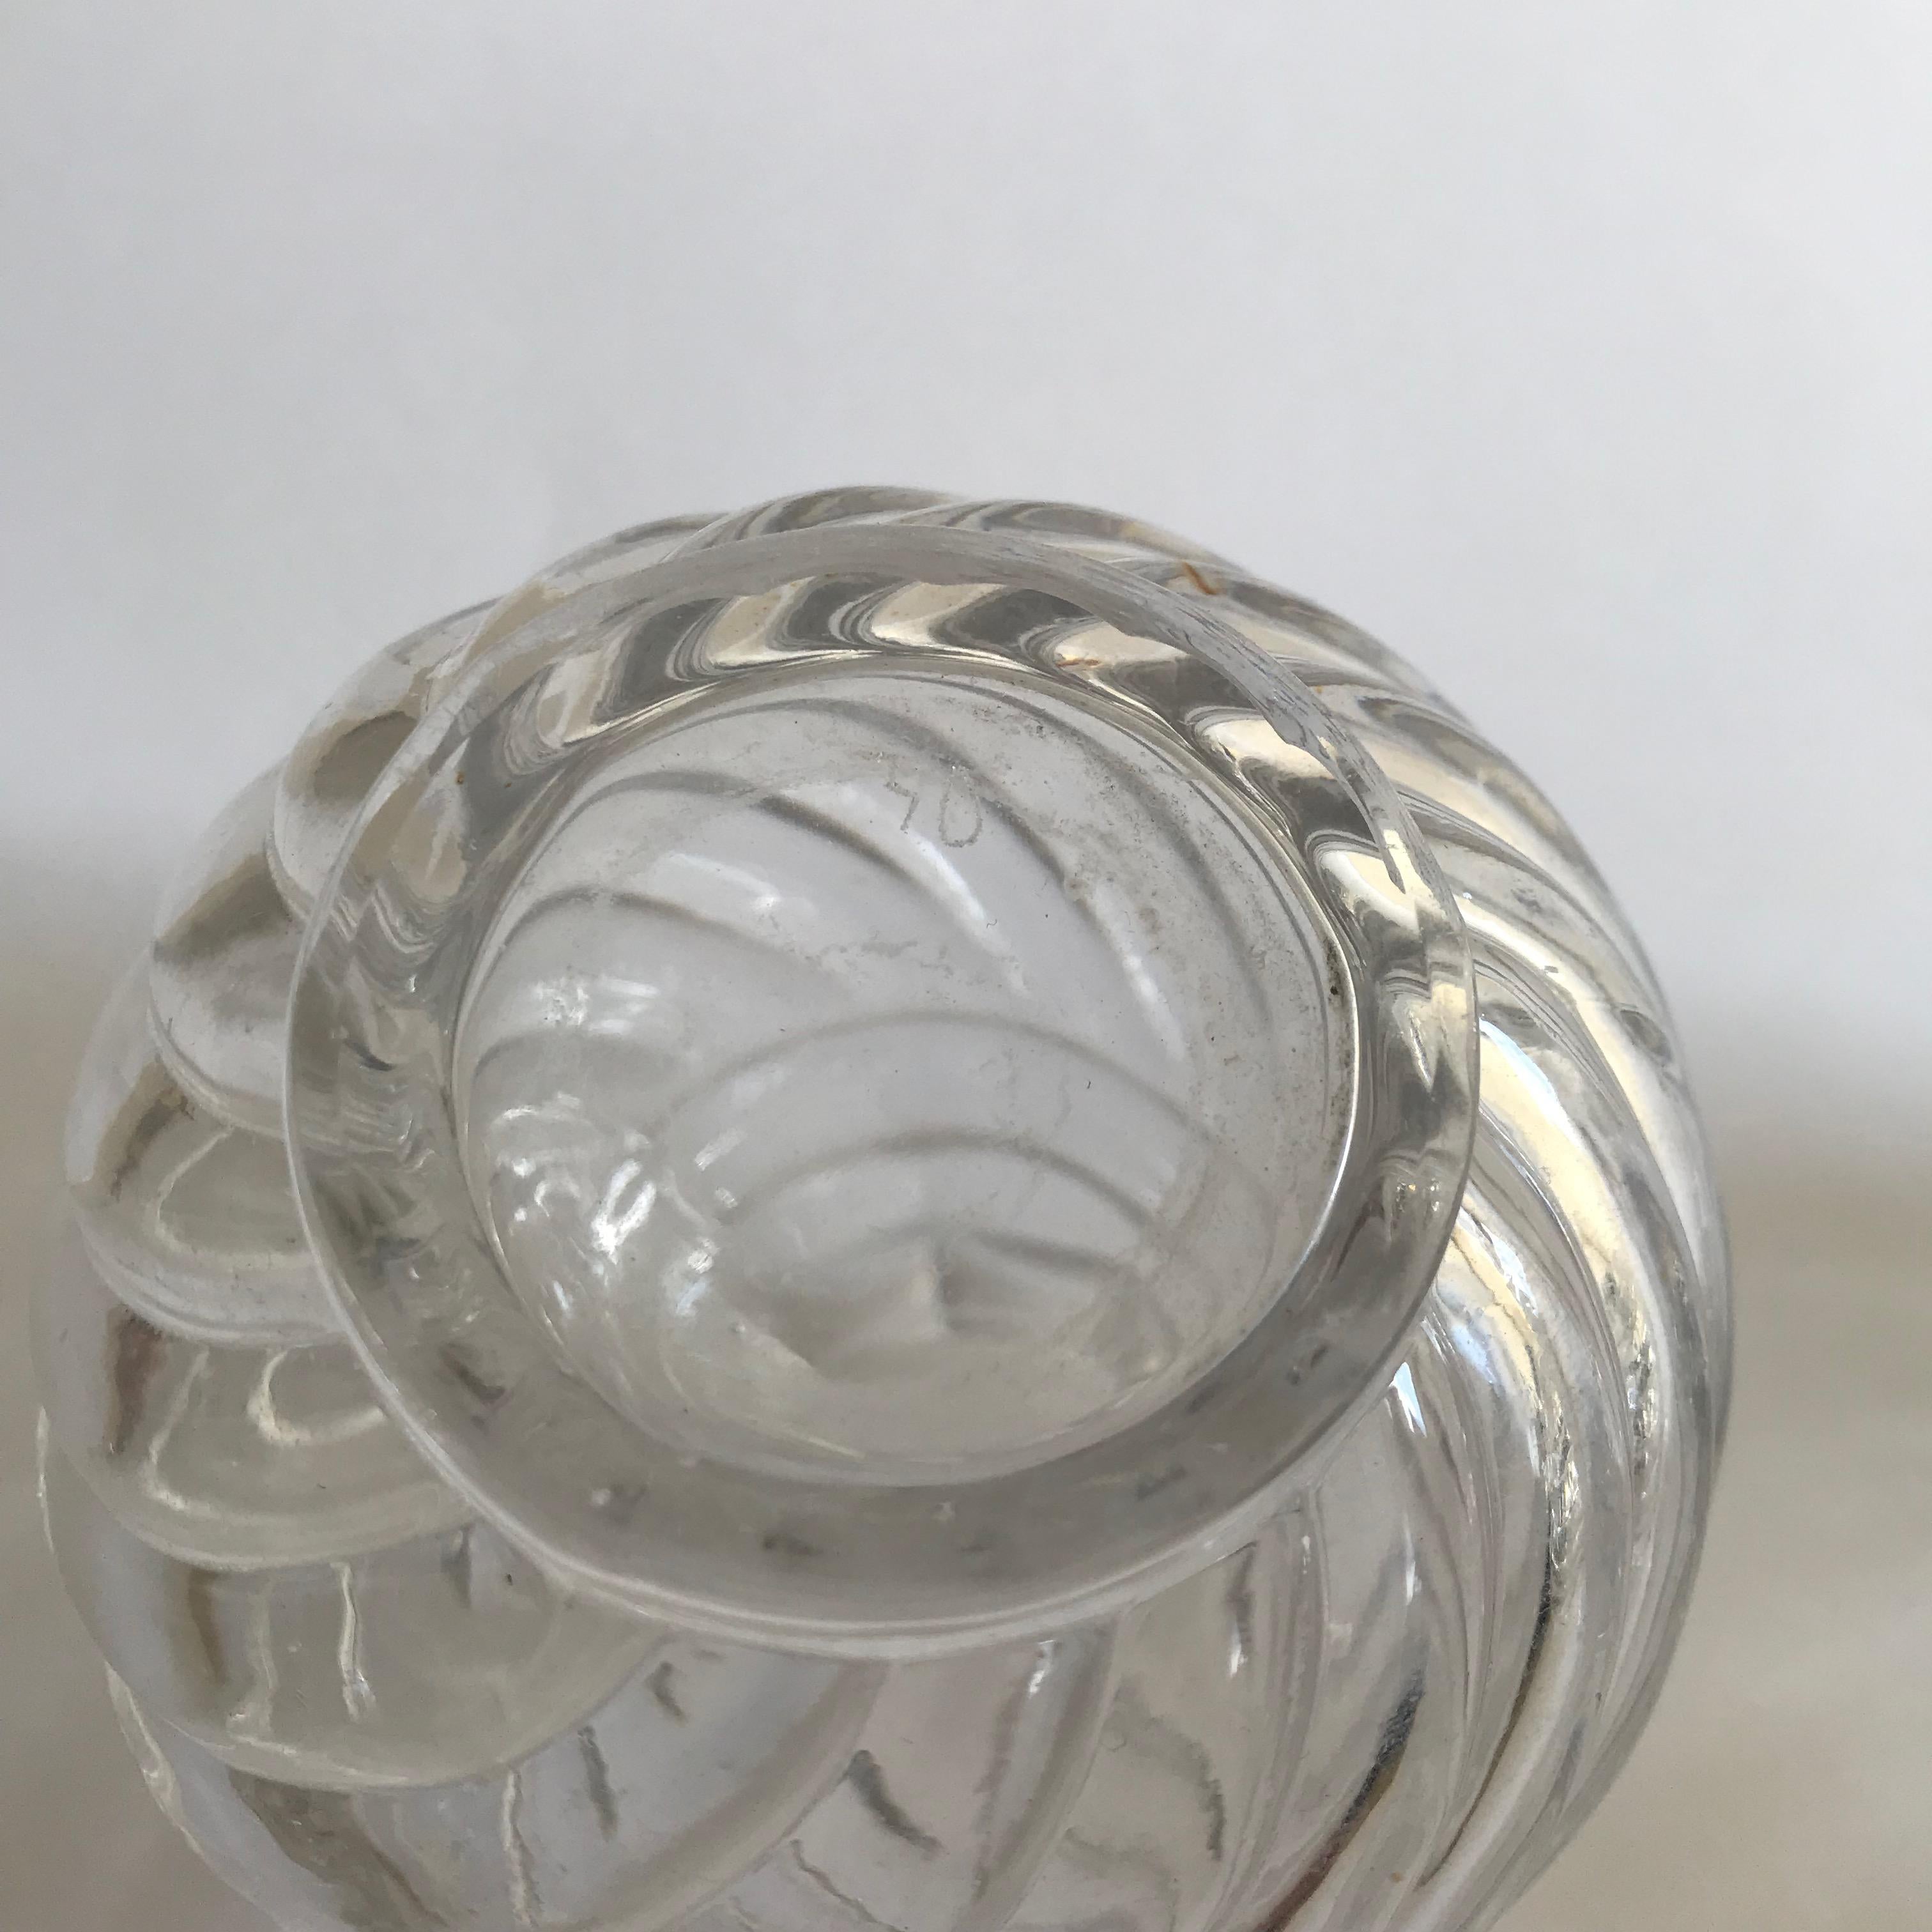 Antique Crystal Bamboo Swirl Perfume Bottles by Baccarat 2